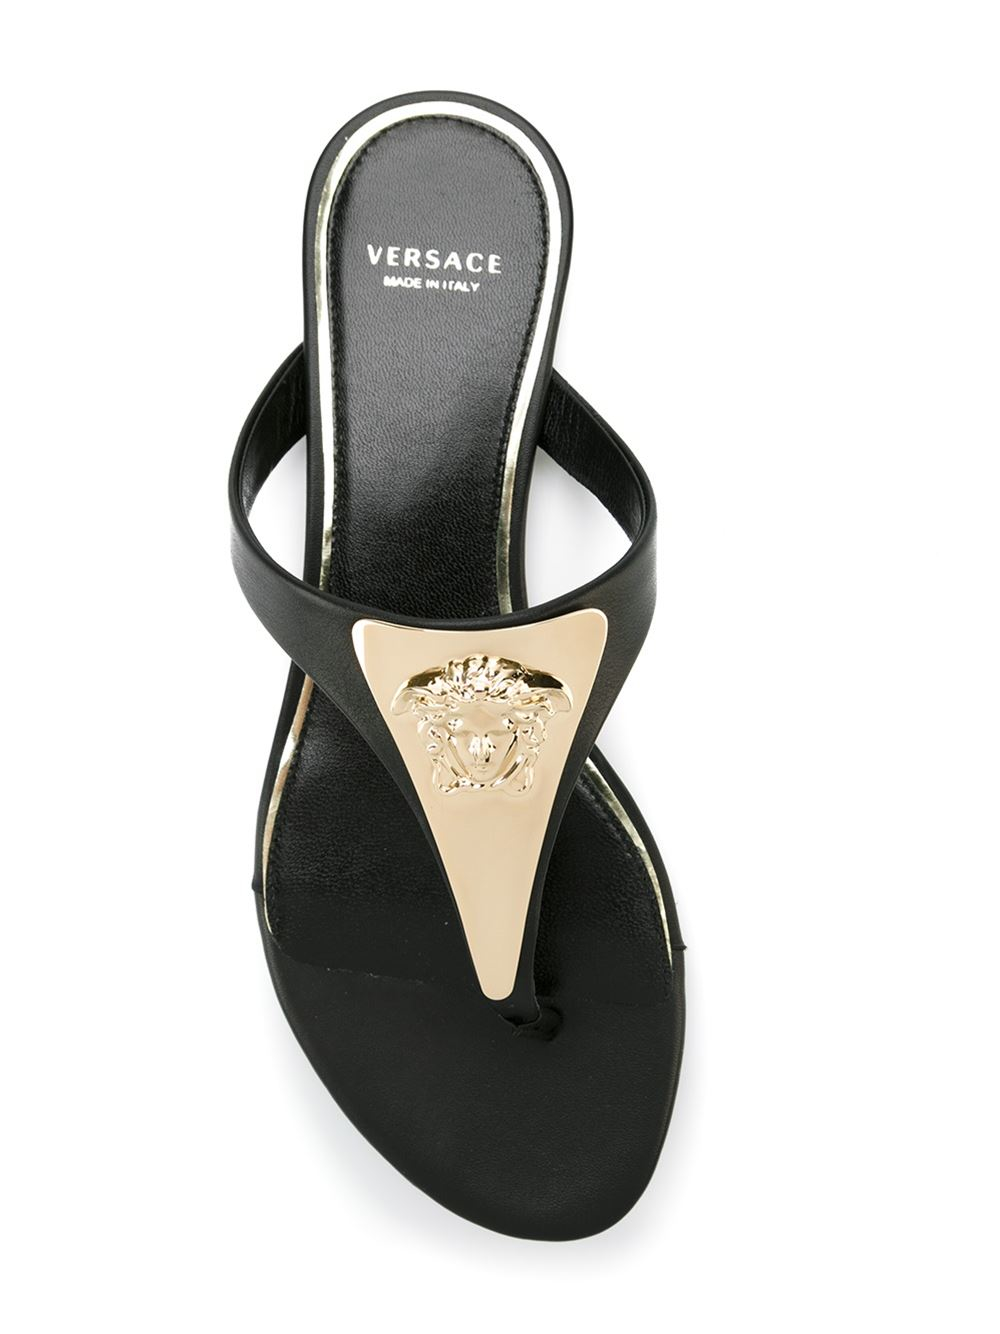 medusa Palazzo' Thong Sandals in Black 